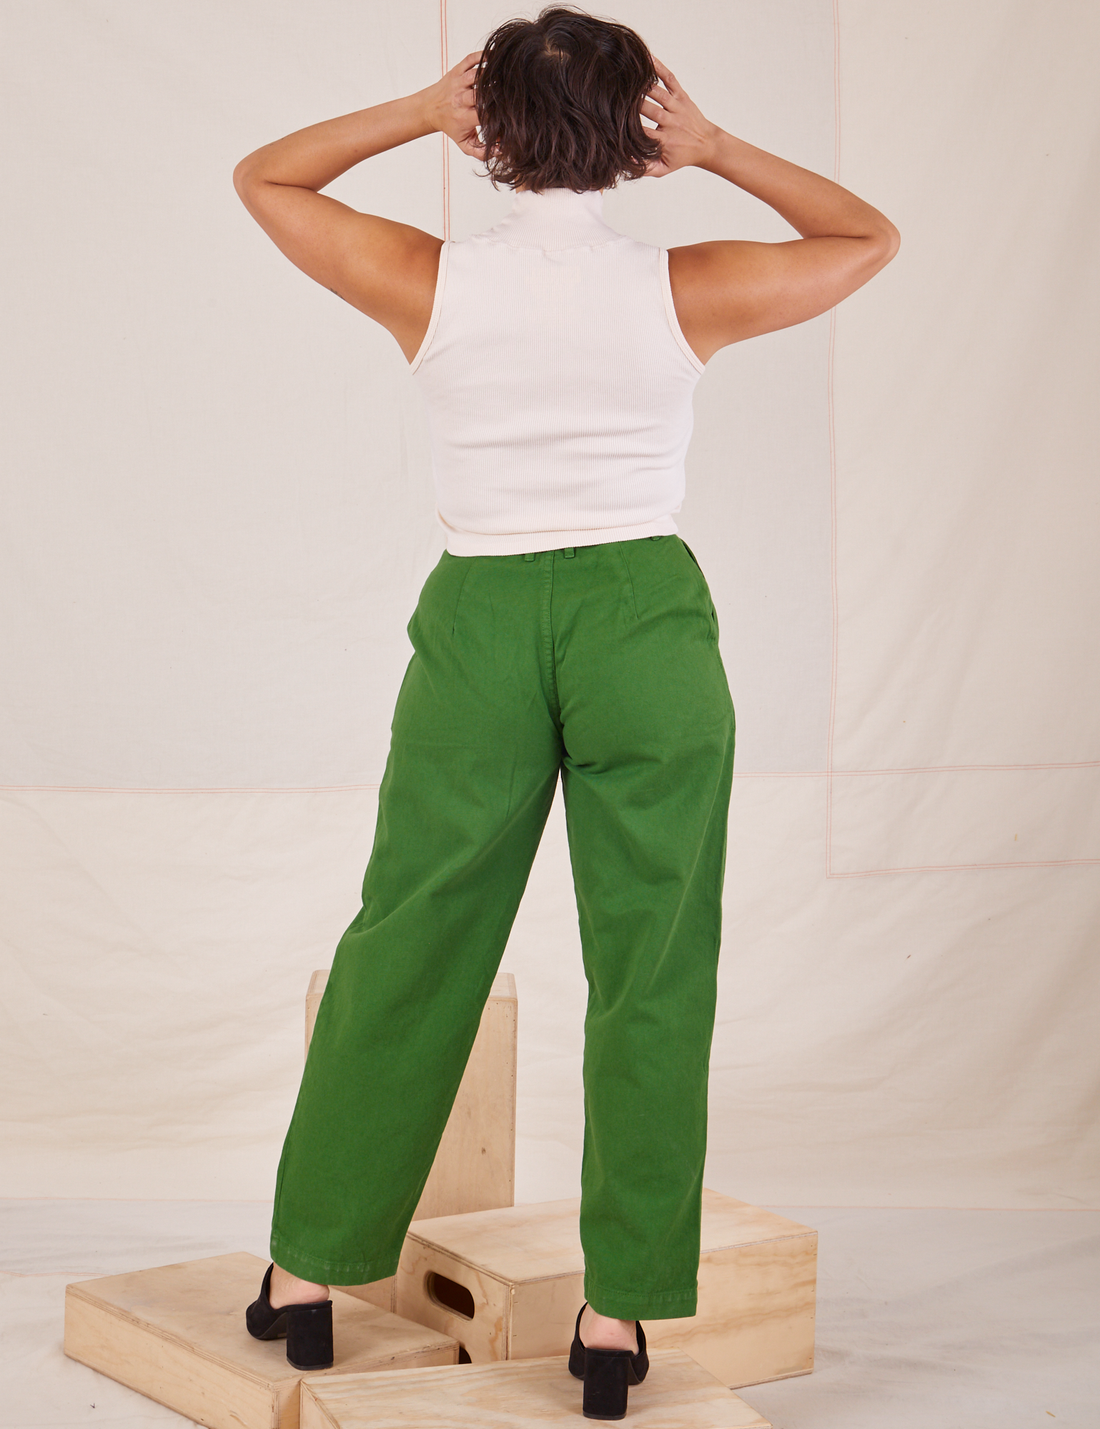 Back view of Heavyweight Trousers in Lawn Green and vintage off-white Sleeveless Turtleneck worn by Tiara